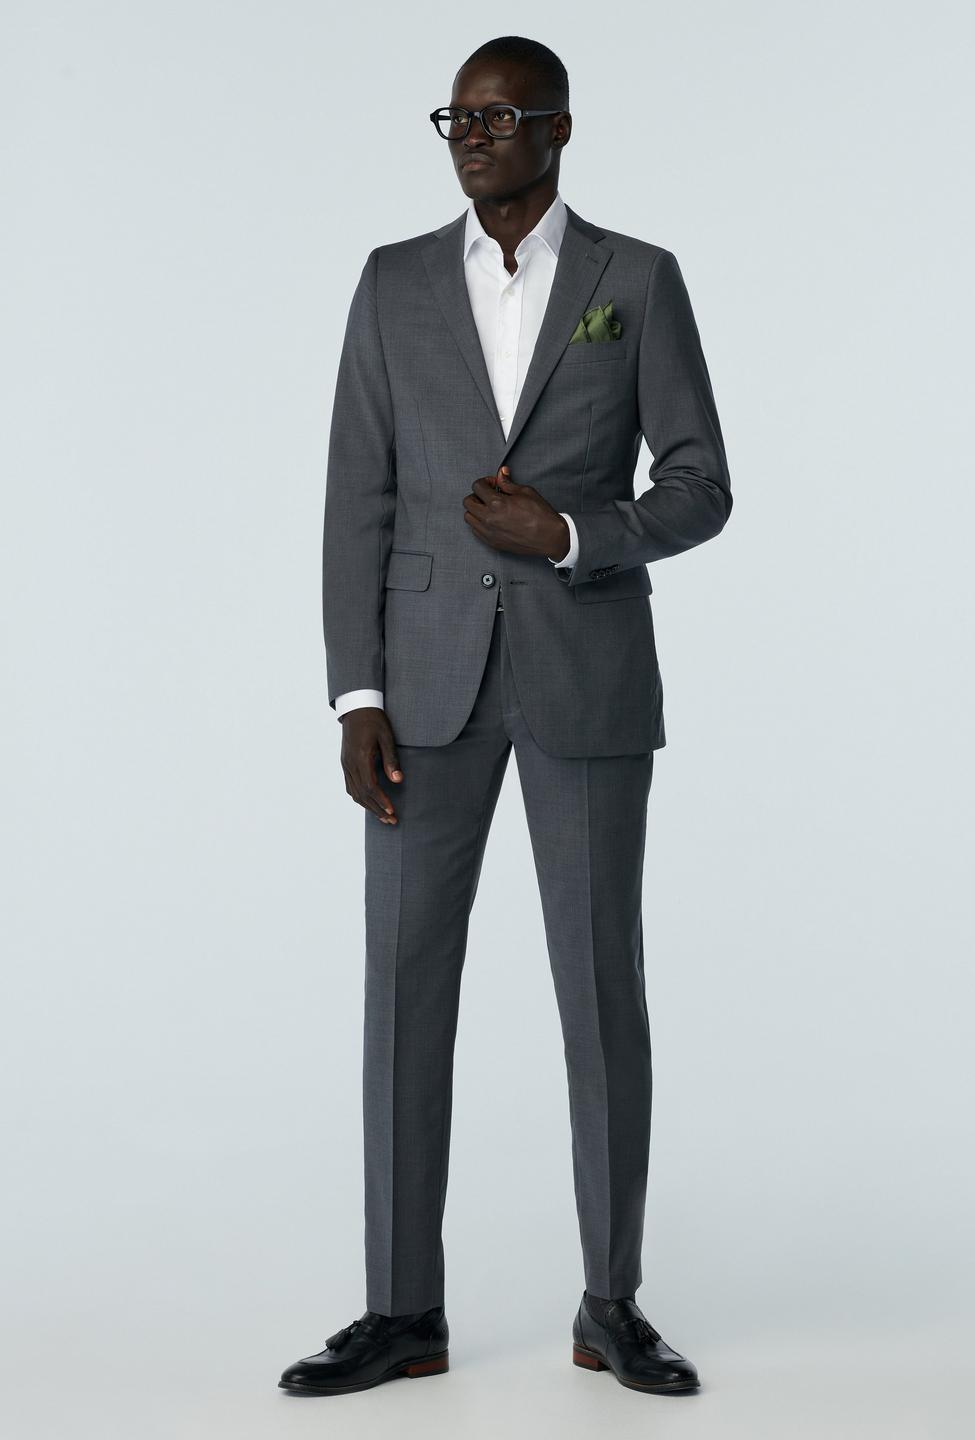 Gray suit - Solid Design from Premium Indochino Collection